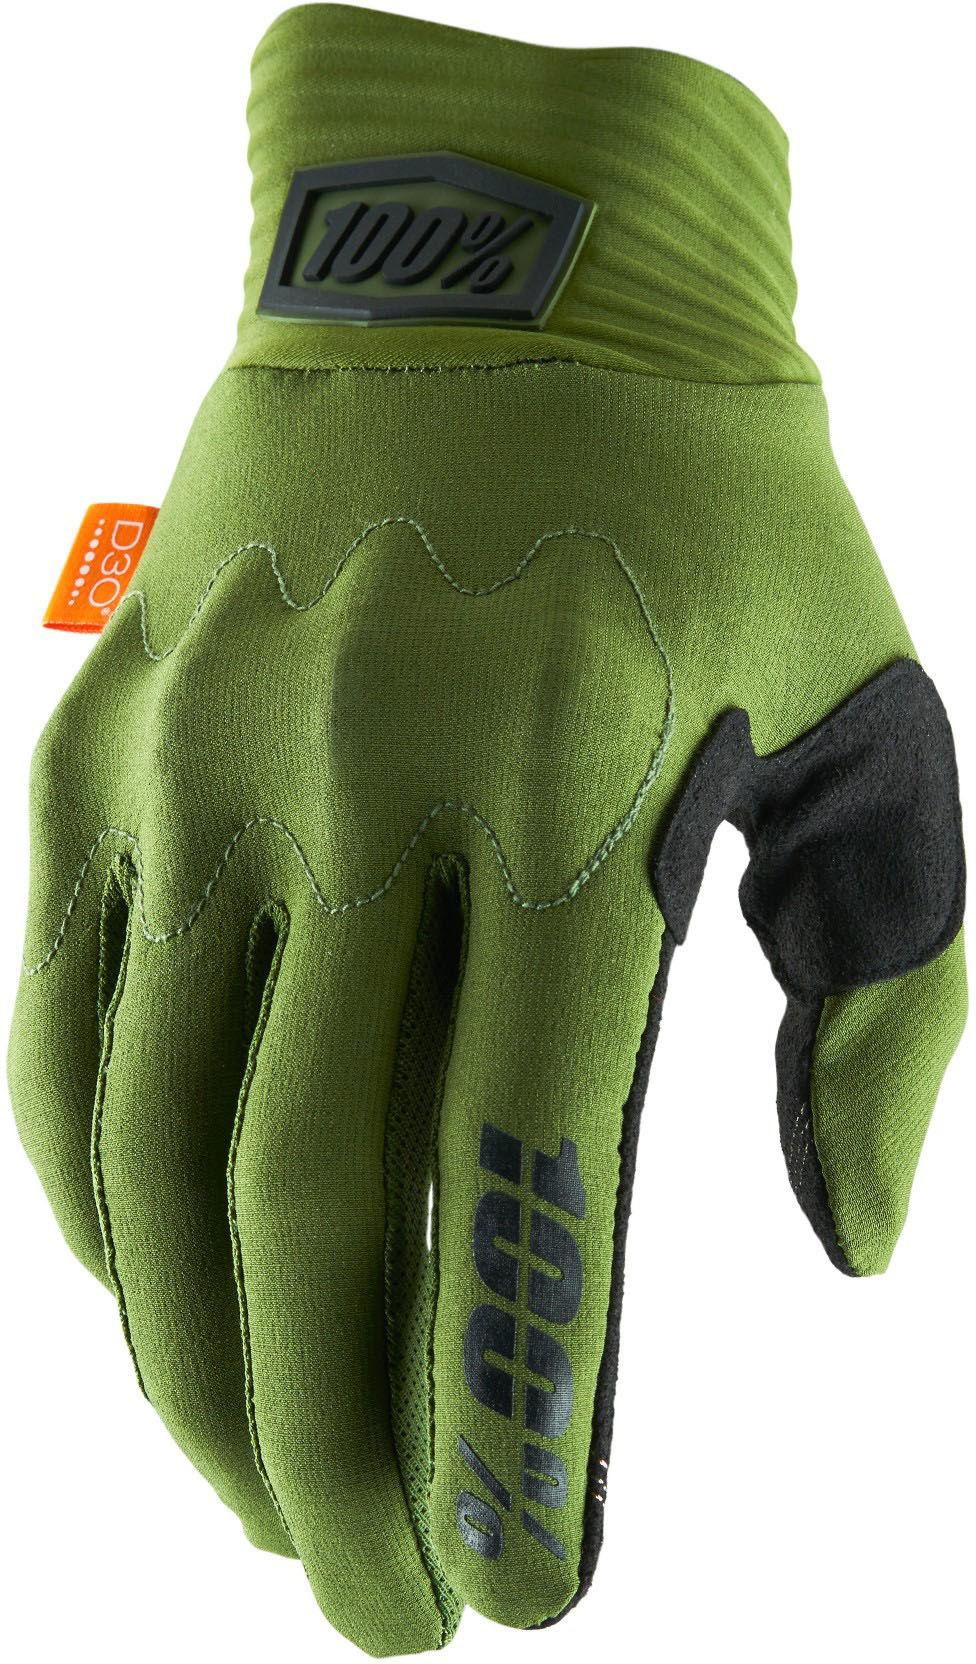 100% Cognito D3o Gloves - Army Green/black